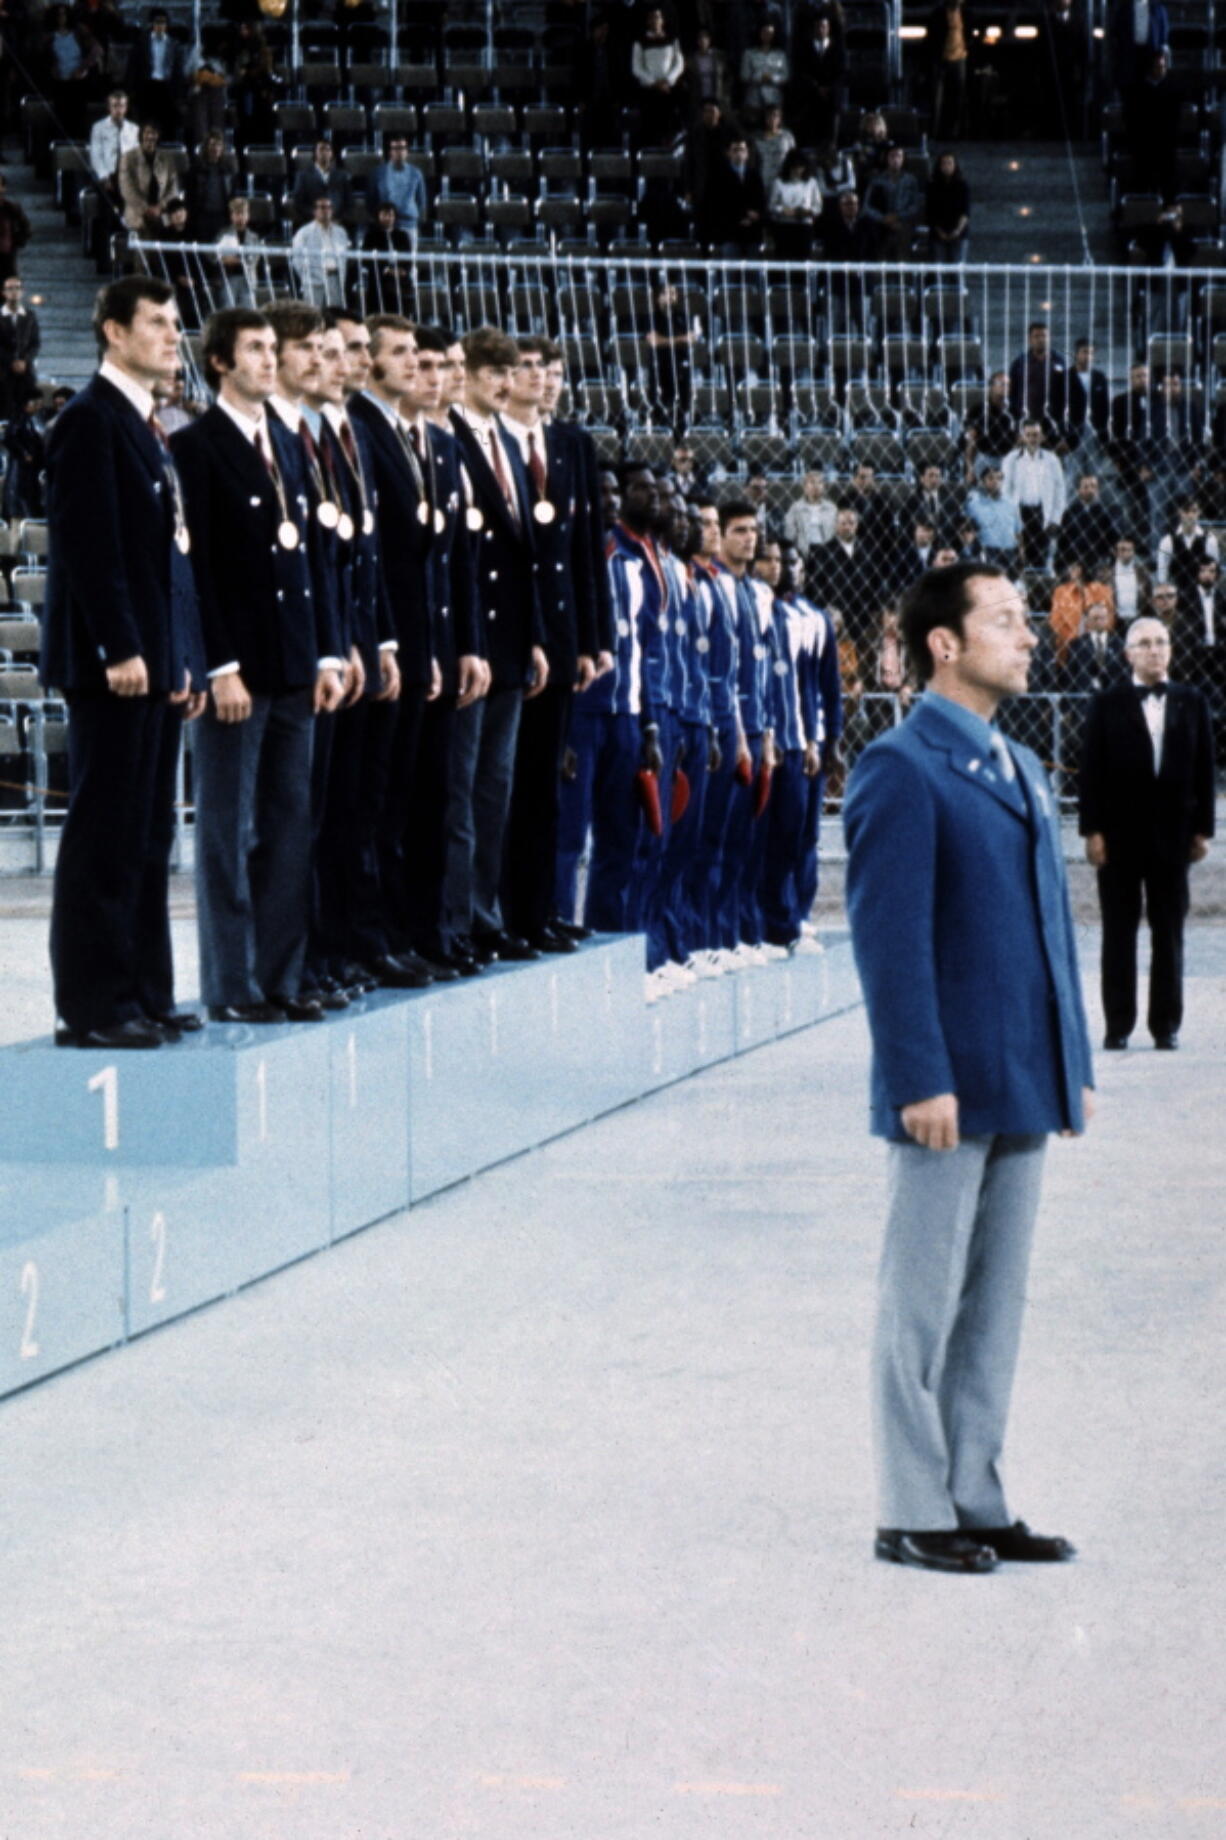 The Soviet Union basketball team stands on the podium after receiving the Olympic gold medal Sept. 10, 1972, in Munich, flanked by the bronze-winning Cubans, right, and a vacant place where the U.S. team, officially given the Olympic silver, was supposed to appear. Members of the 1972 U.S. Olympic men's basketball team have talked about finally retrieving those silver medals they vowed to never accept. No, they still don't want them for themselves. They believe the medals belong in the Naismith Memorial Basketball Hall of Fame, but the latest attempt to get them from the International Olympic Committee has been thwarted.